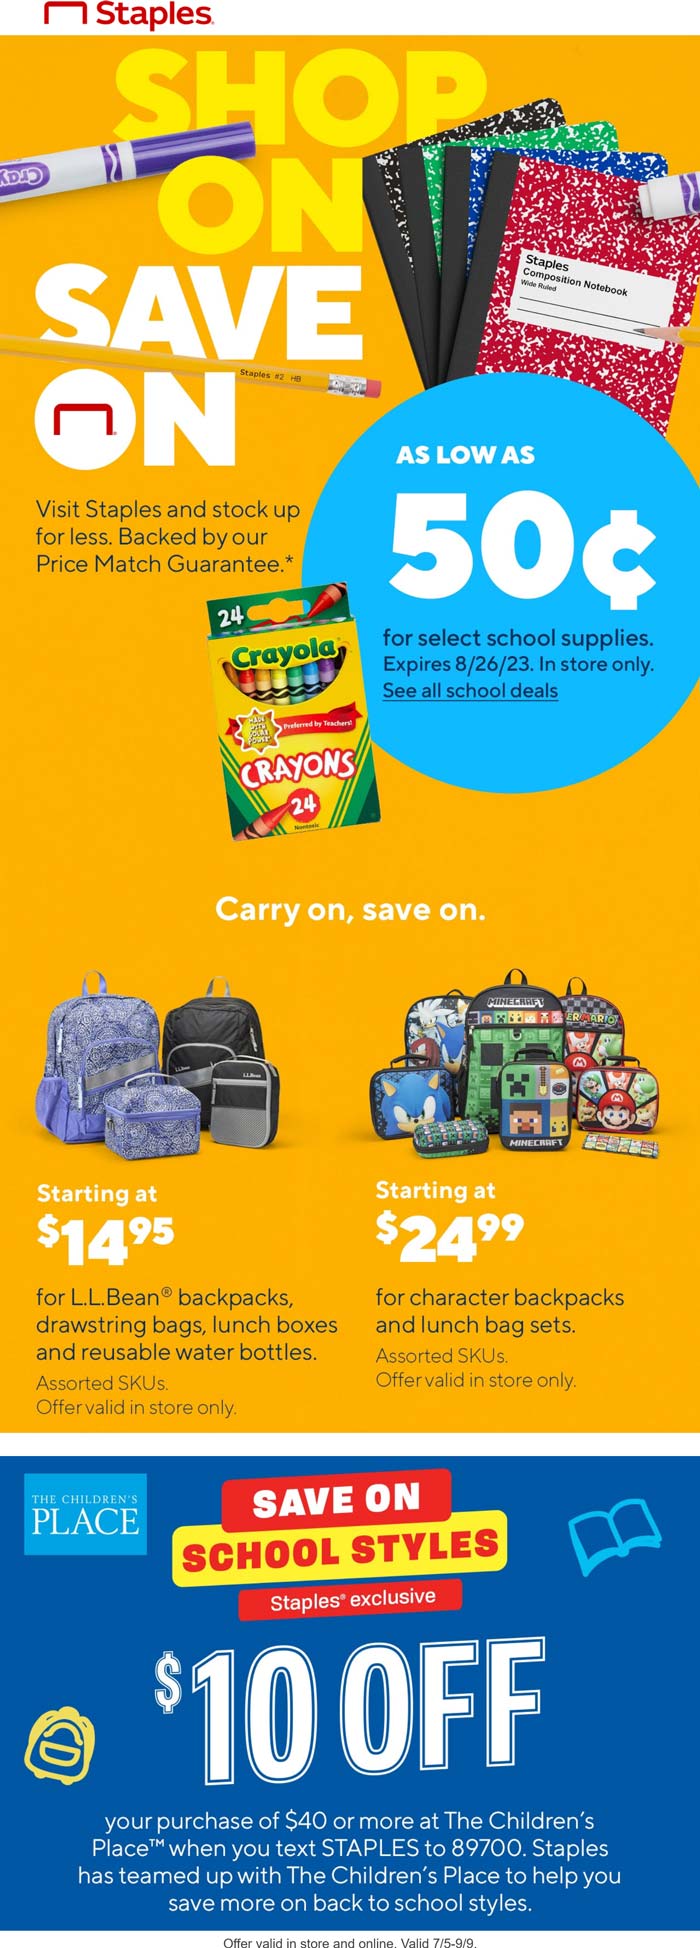 Staples stores Coupon  Various .50 cent school supplies & more at Staples #staples 